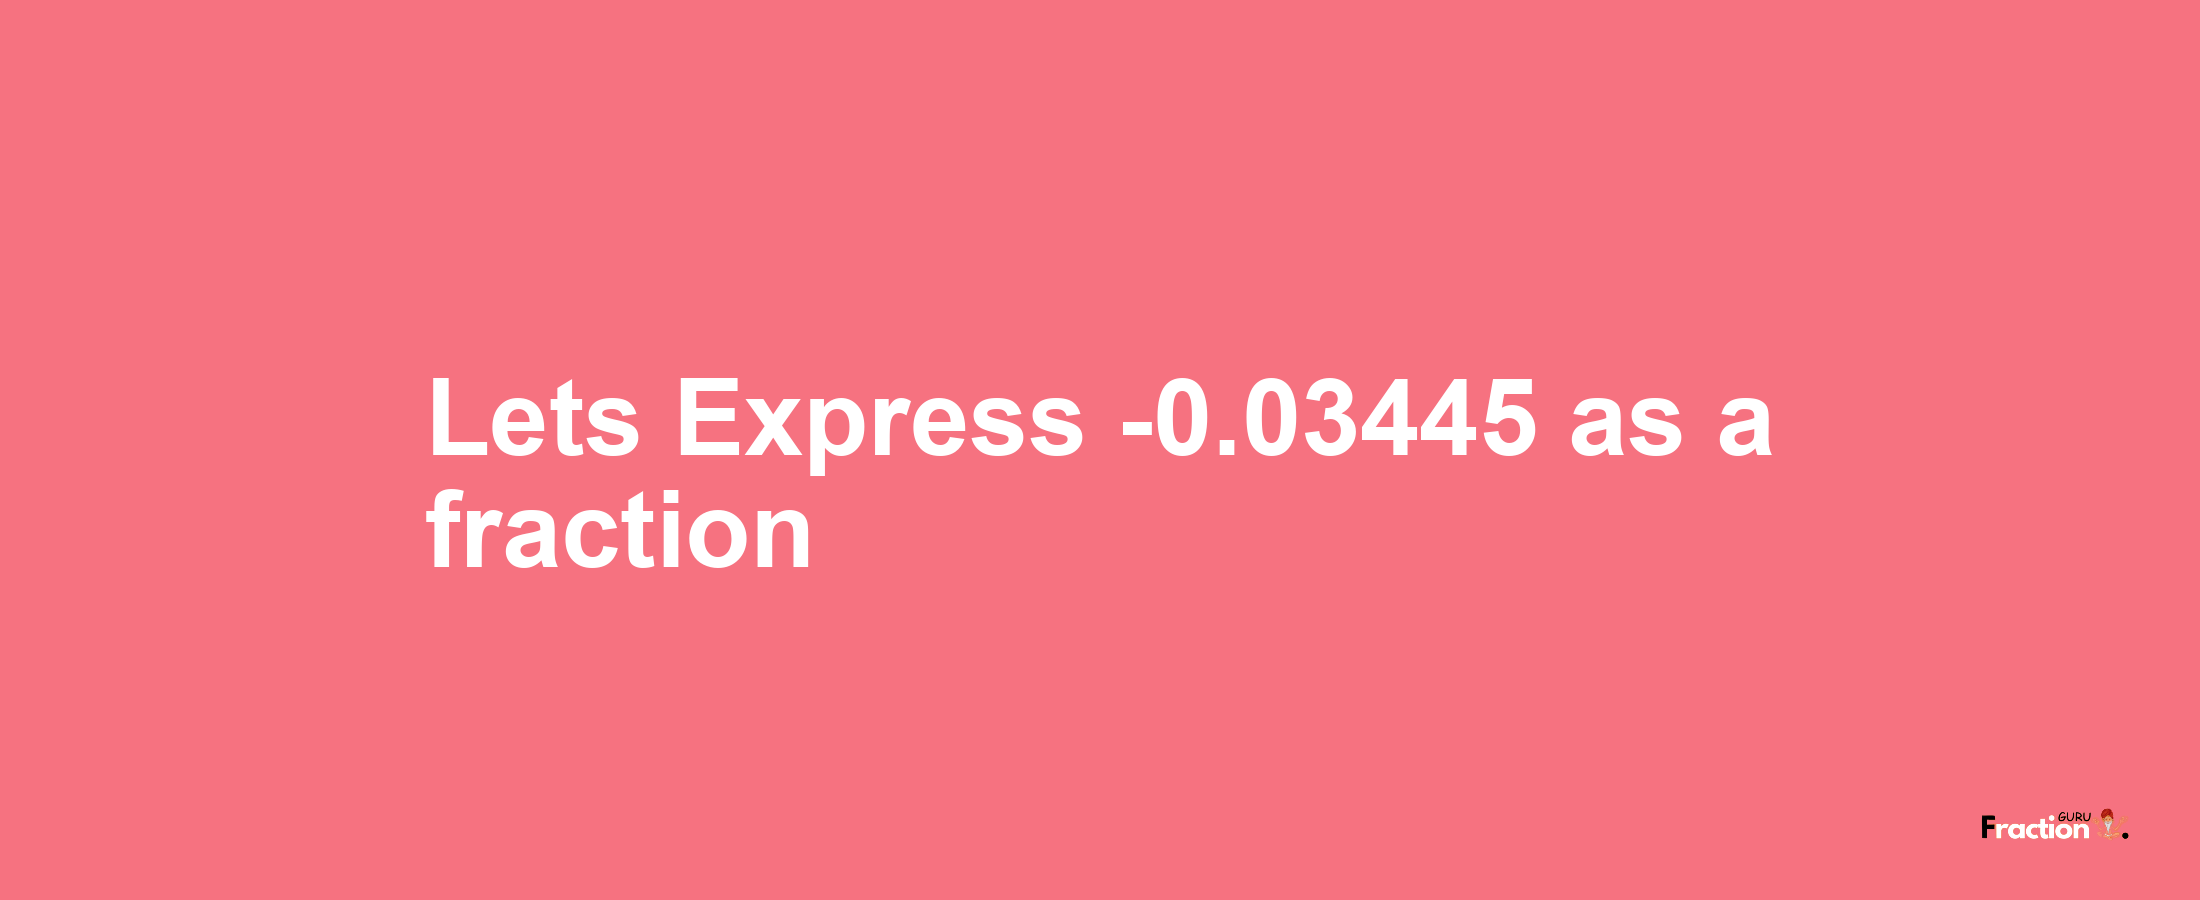 Lets Express -0.03445 as afraction